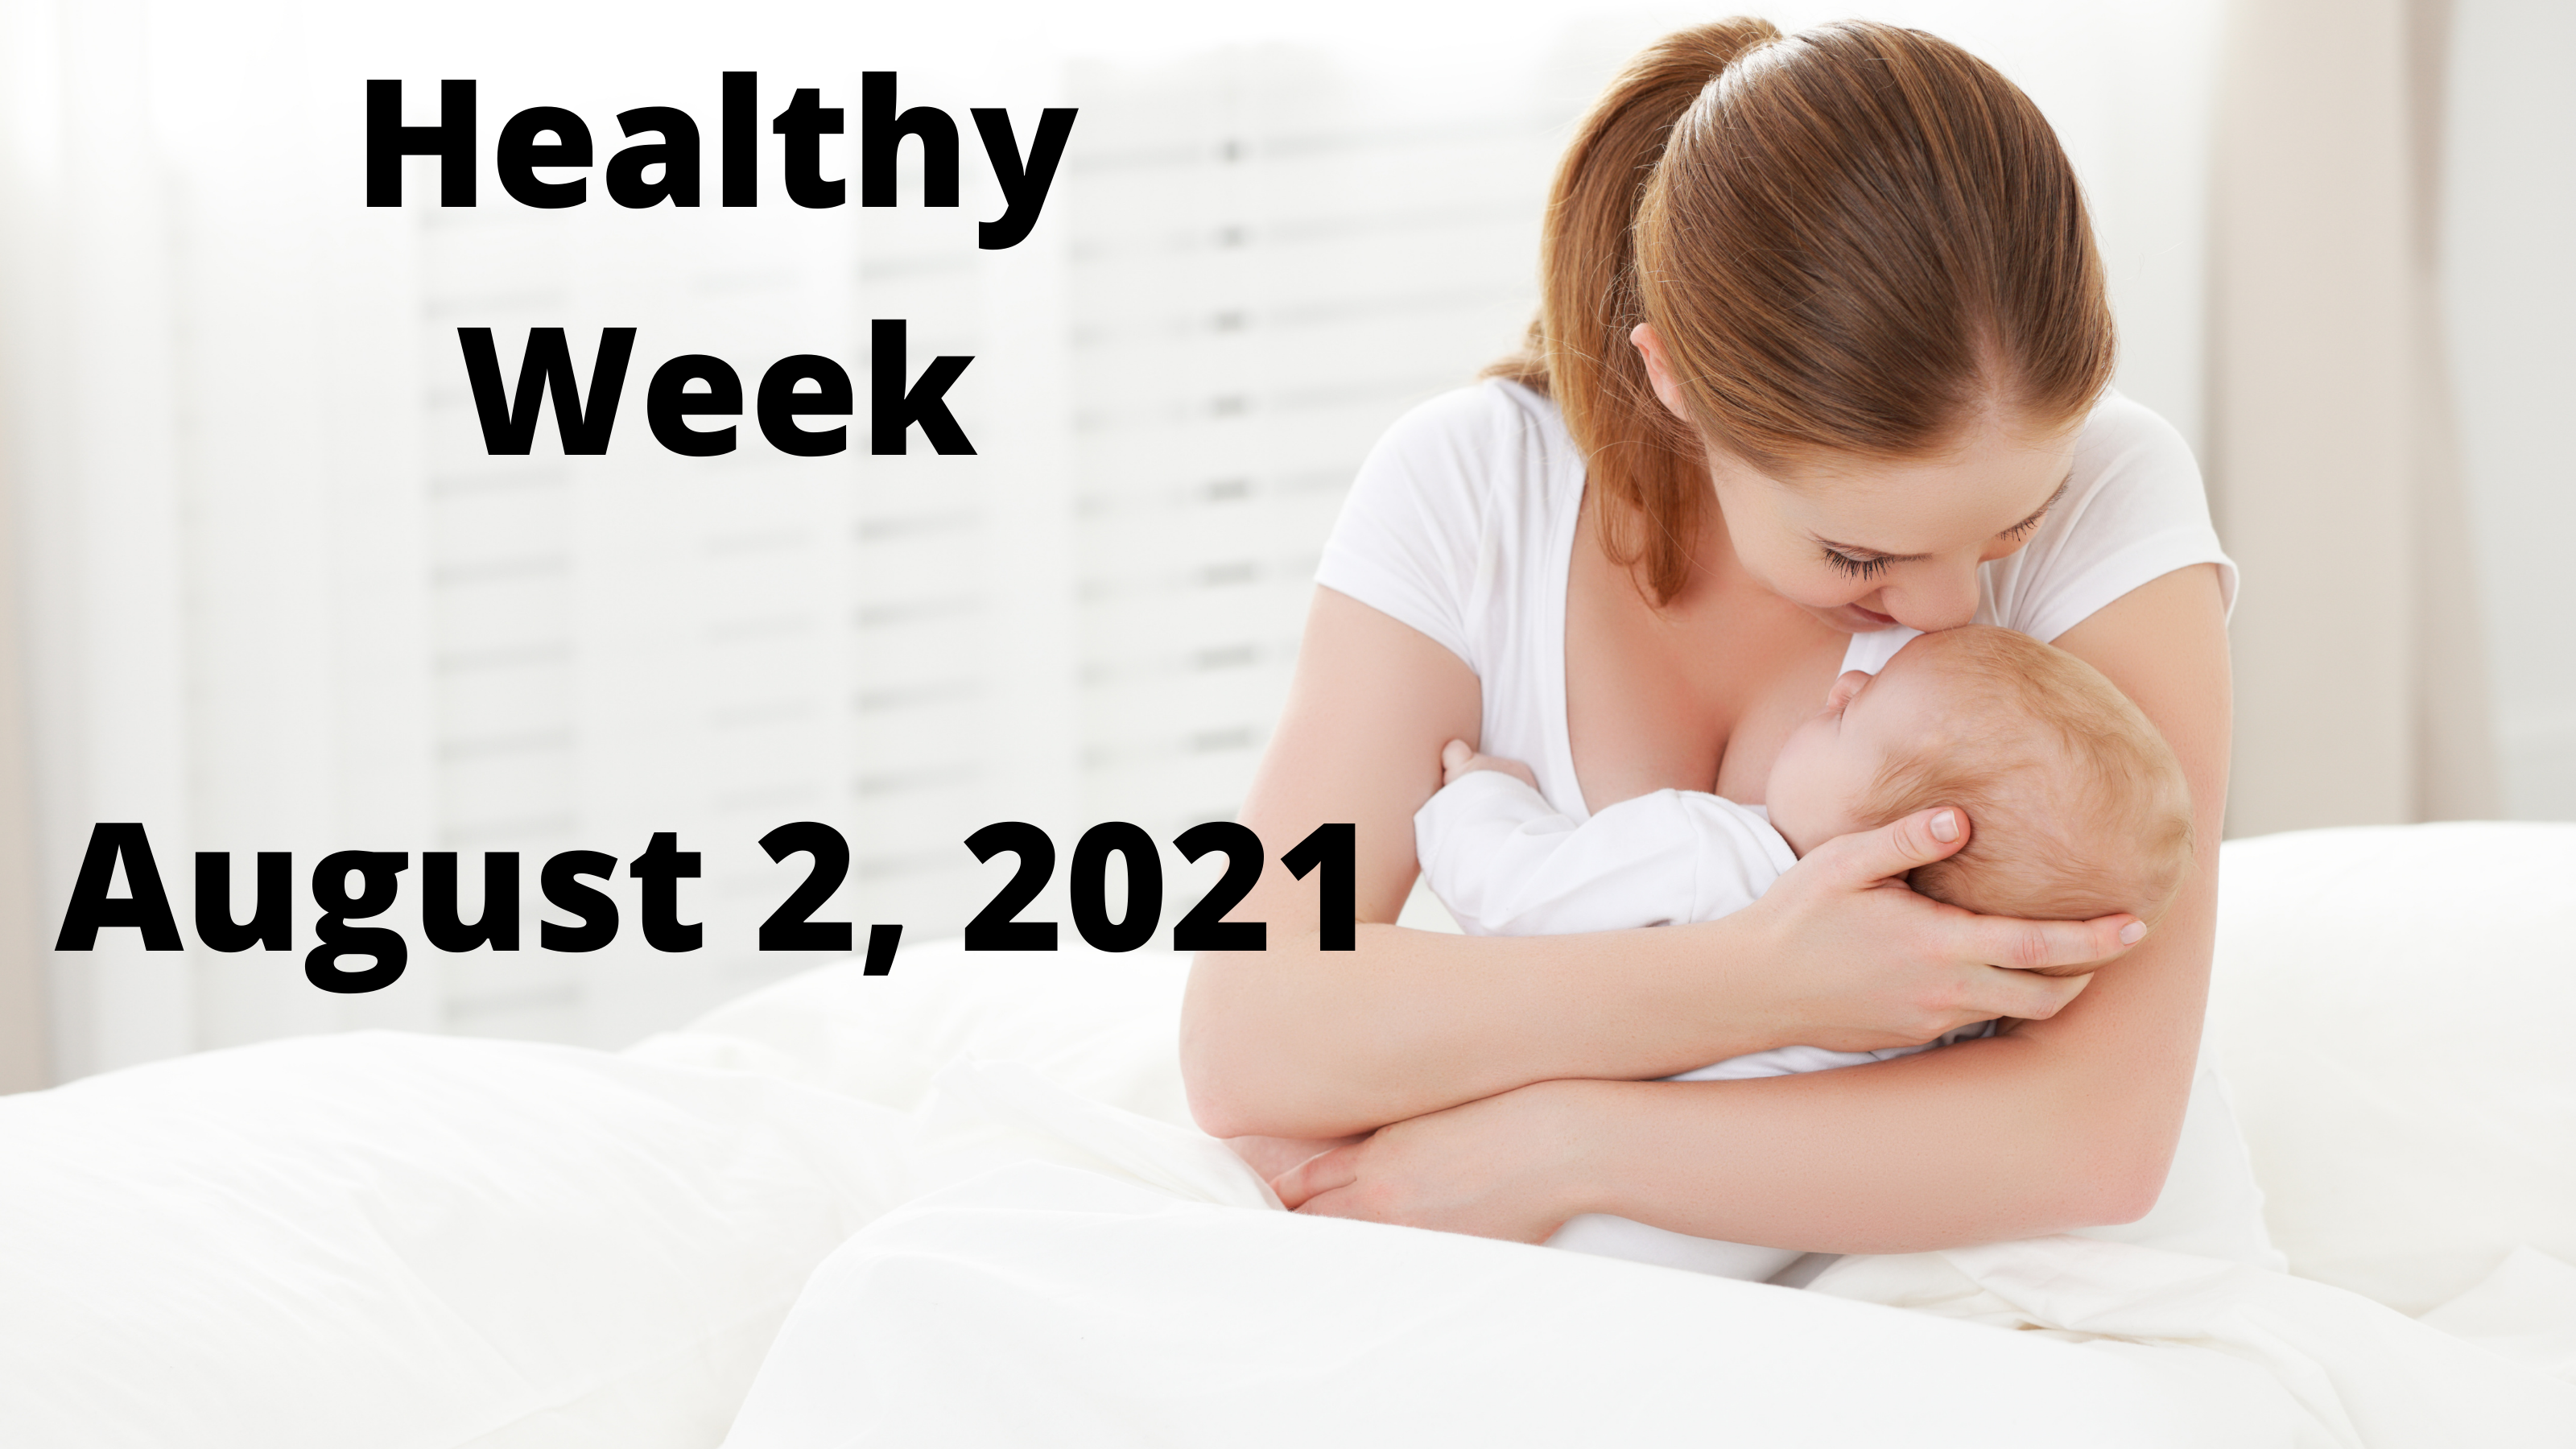 August 2 - National Breastfeeding Month